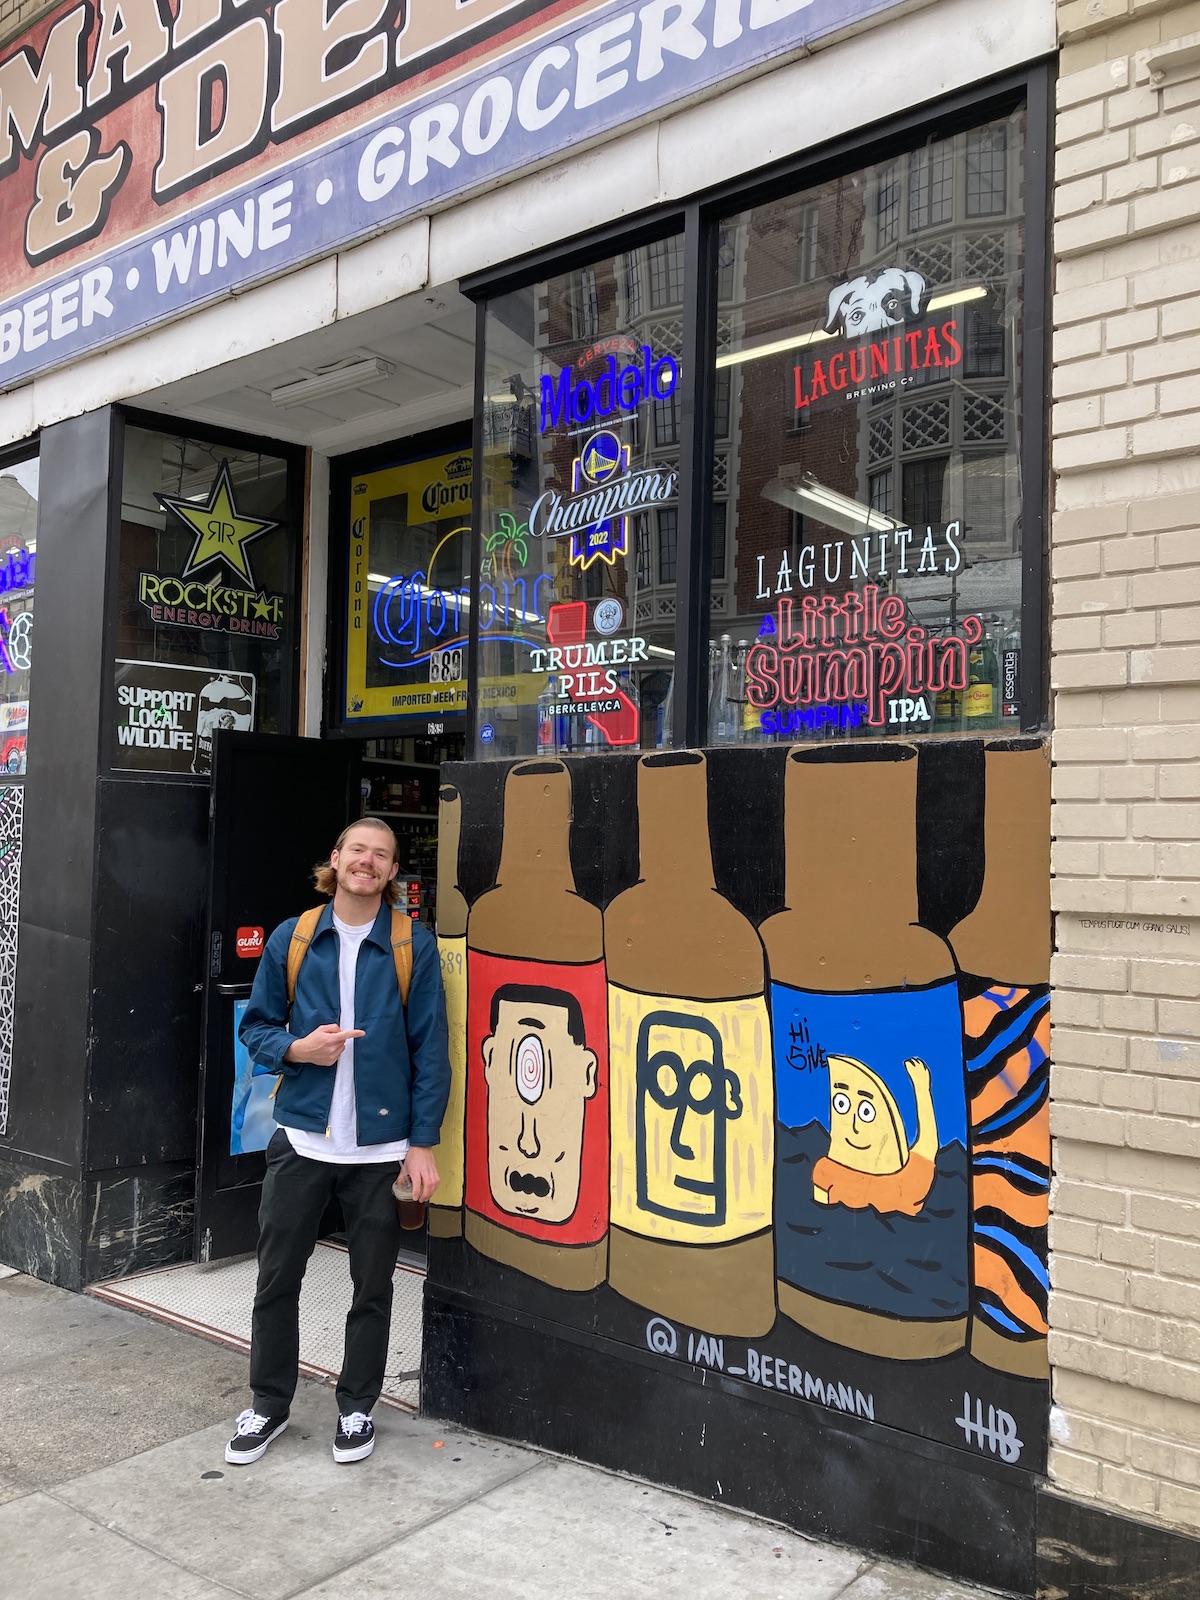 A man poses next to a mural of four cartoon bottles on the outside wall of a store with prominent beer and wine signs.